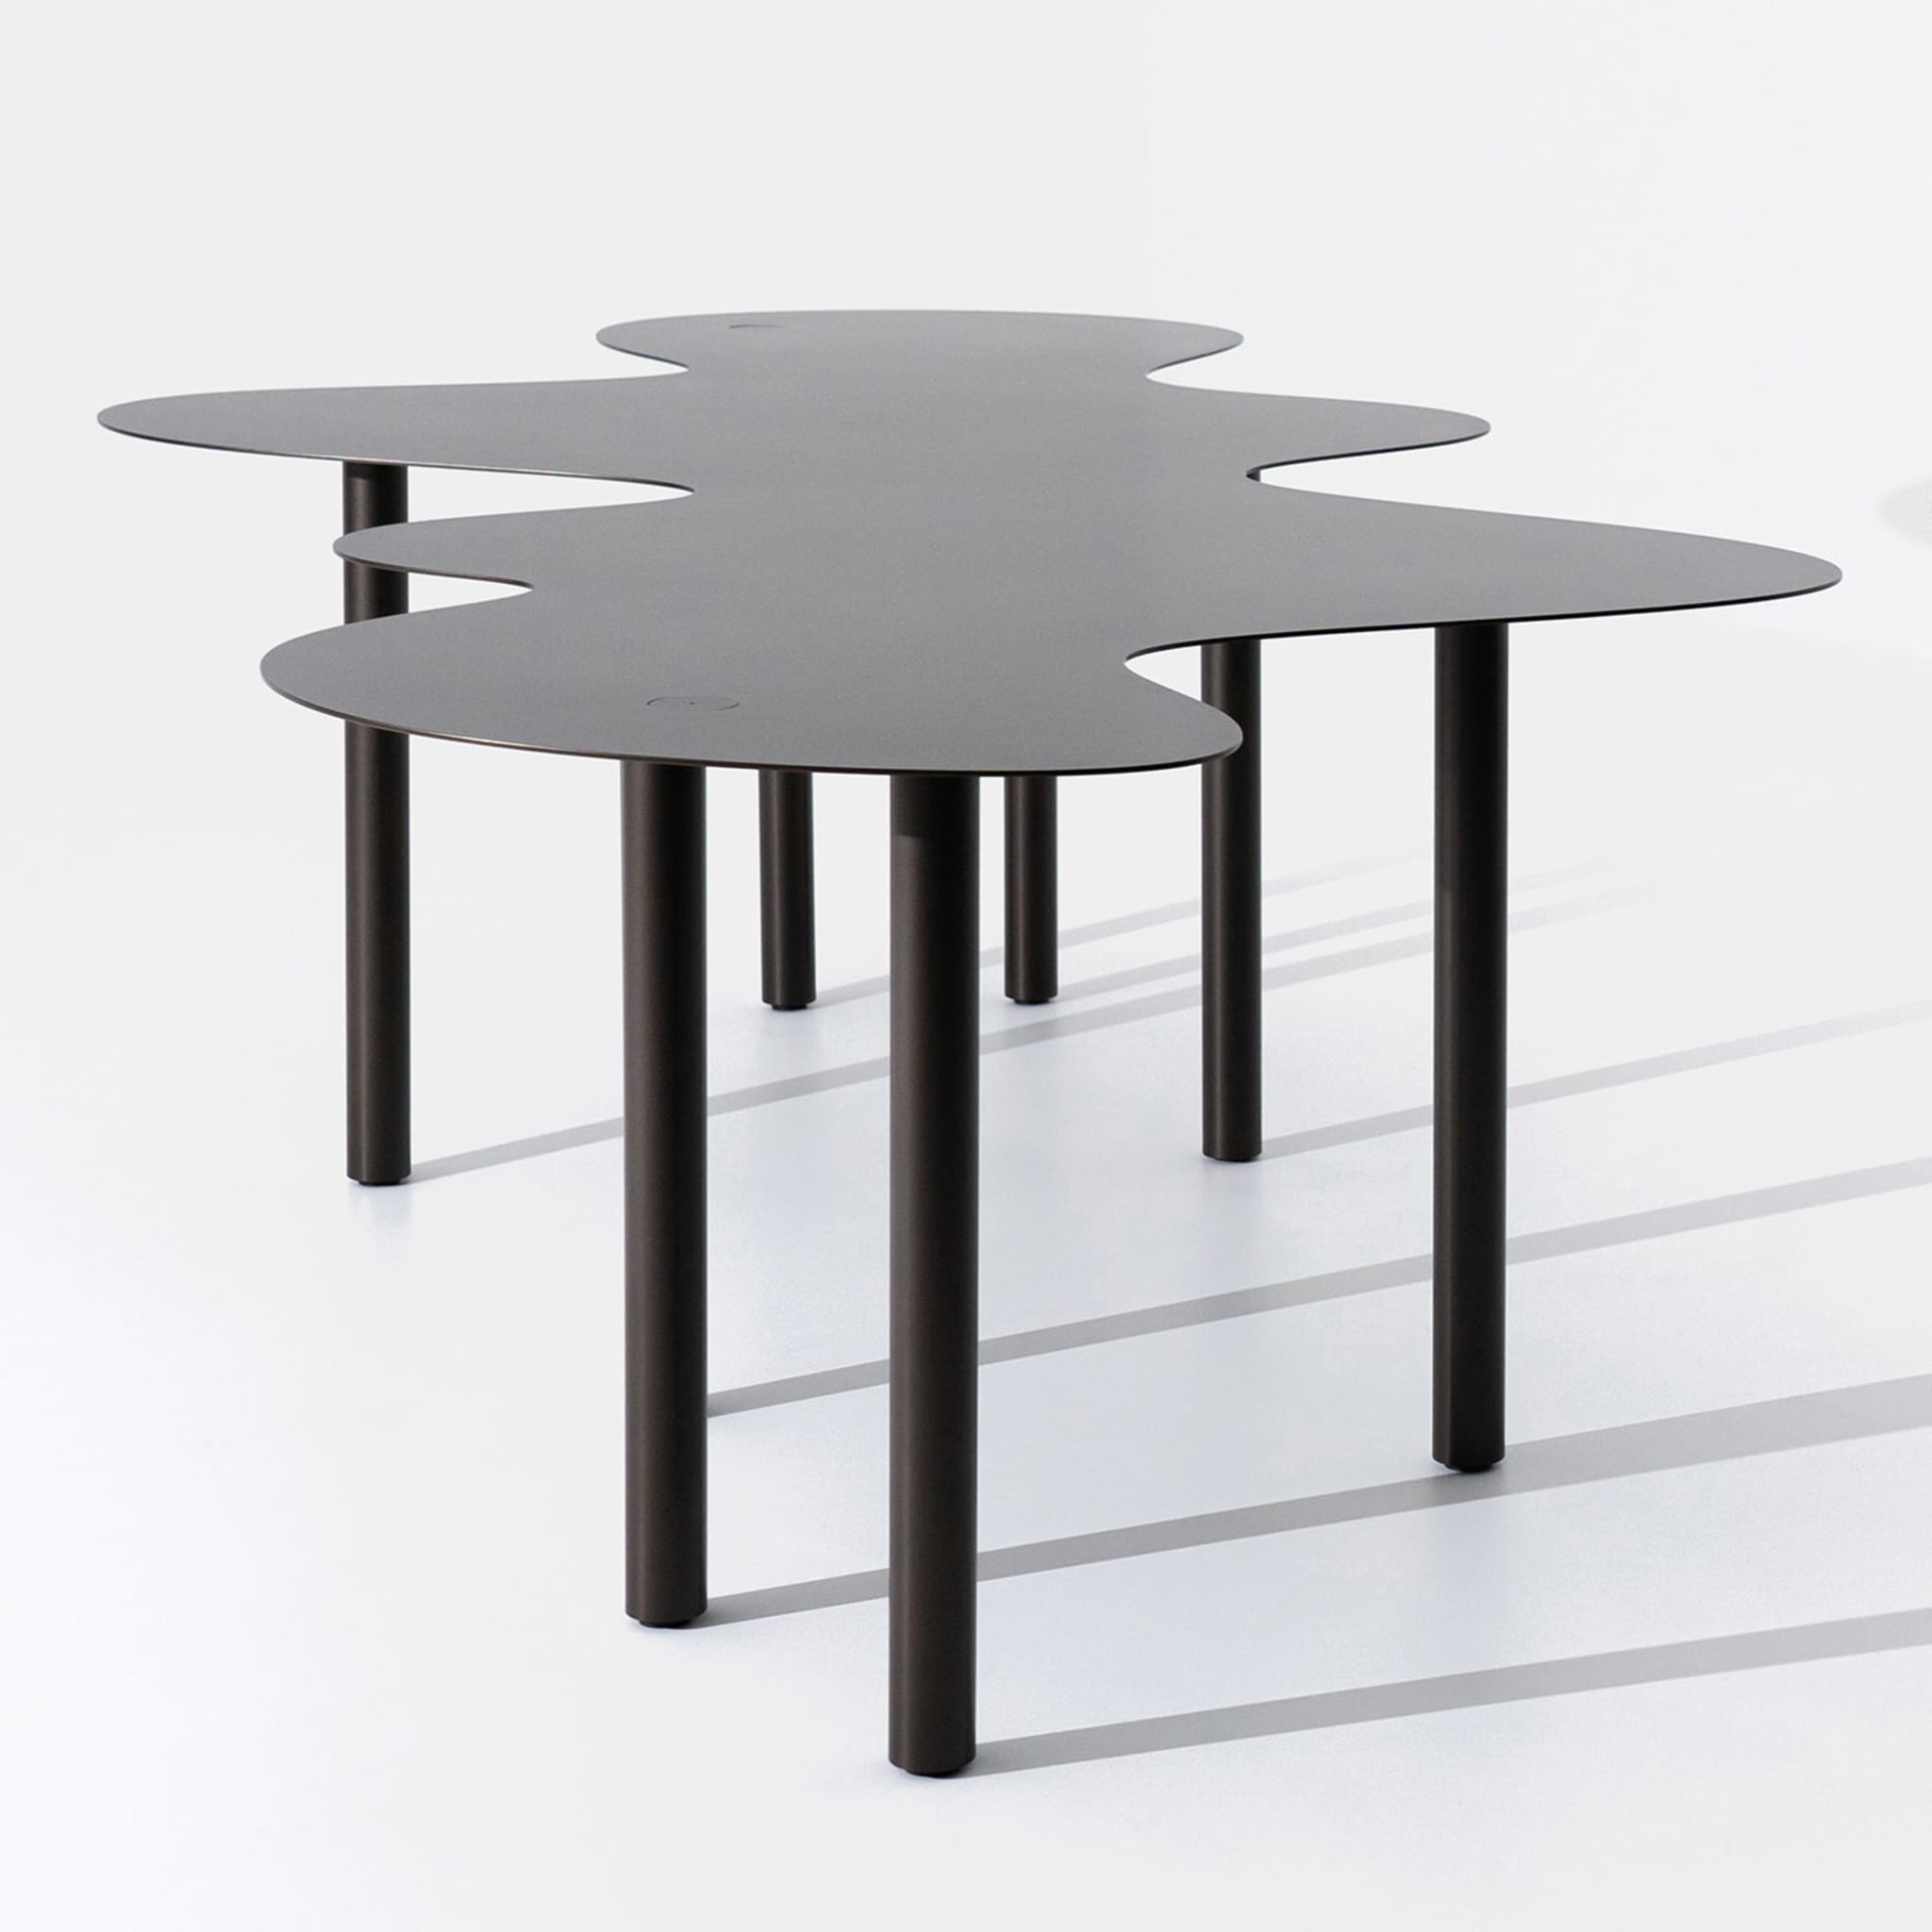 Nuvola 01 Dining Table by Mario Cucinella - Alternative view 2